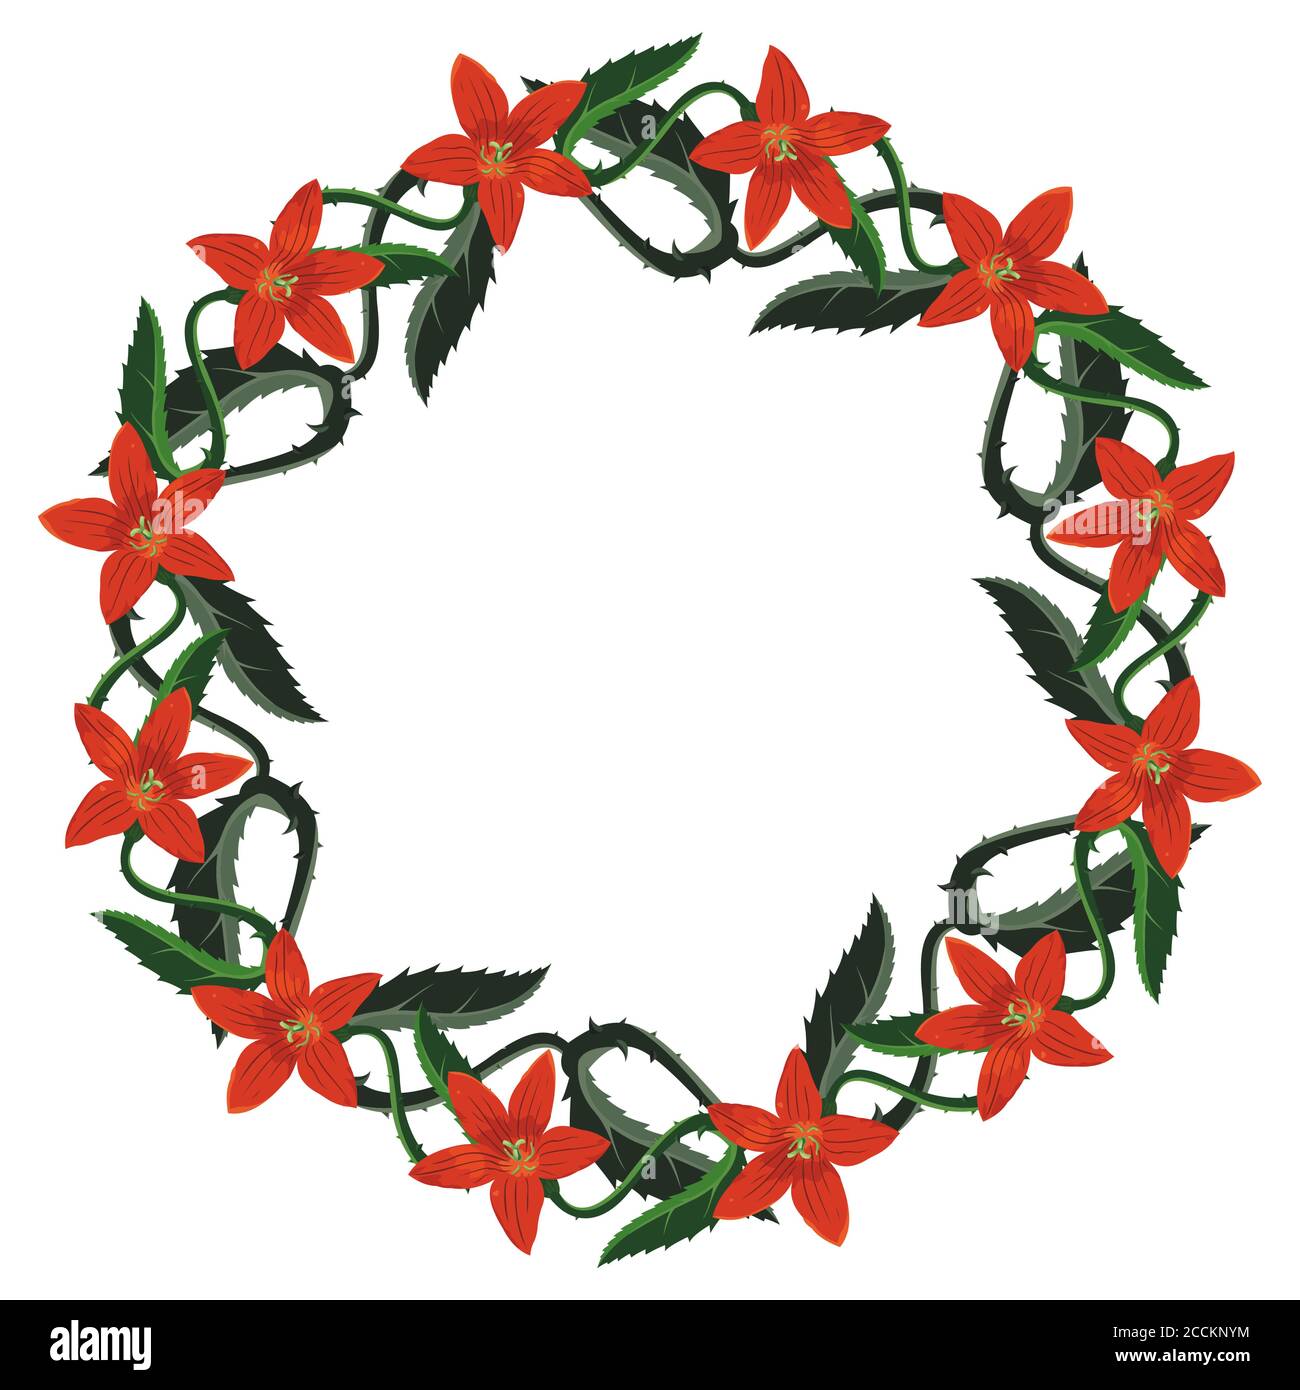 Beautiful wreath with red spiked flowers on white background Stock Vector